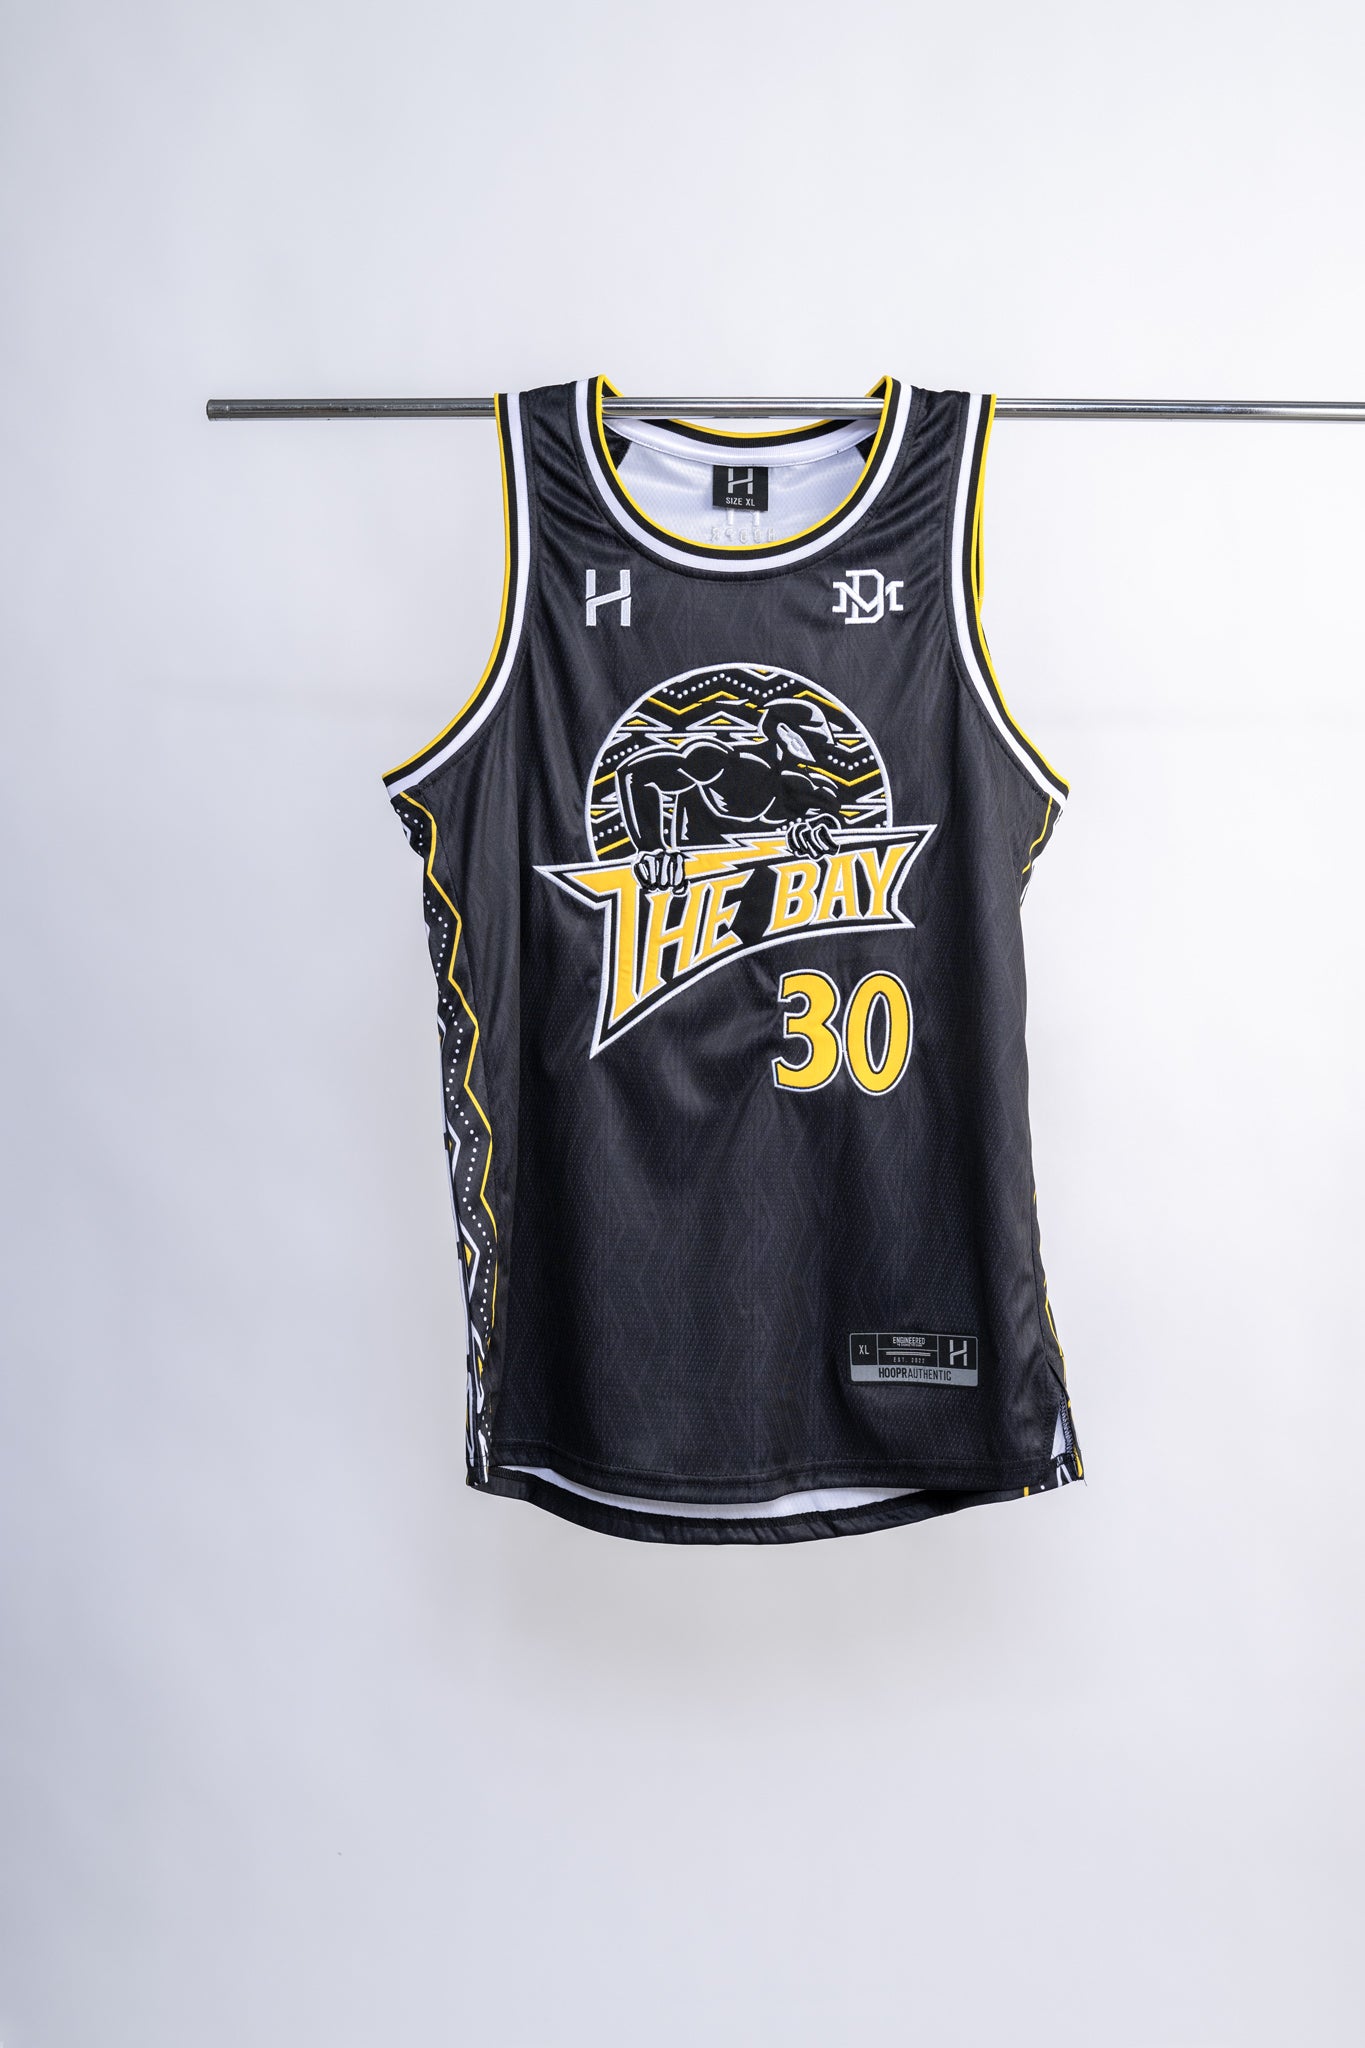 Memphis I AM A MAN Basketball Jersey by HOOPR and Diego Menocal – HOOPR  Store